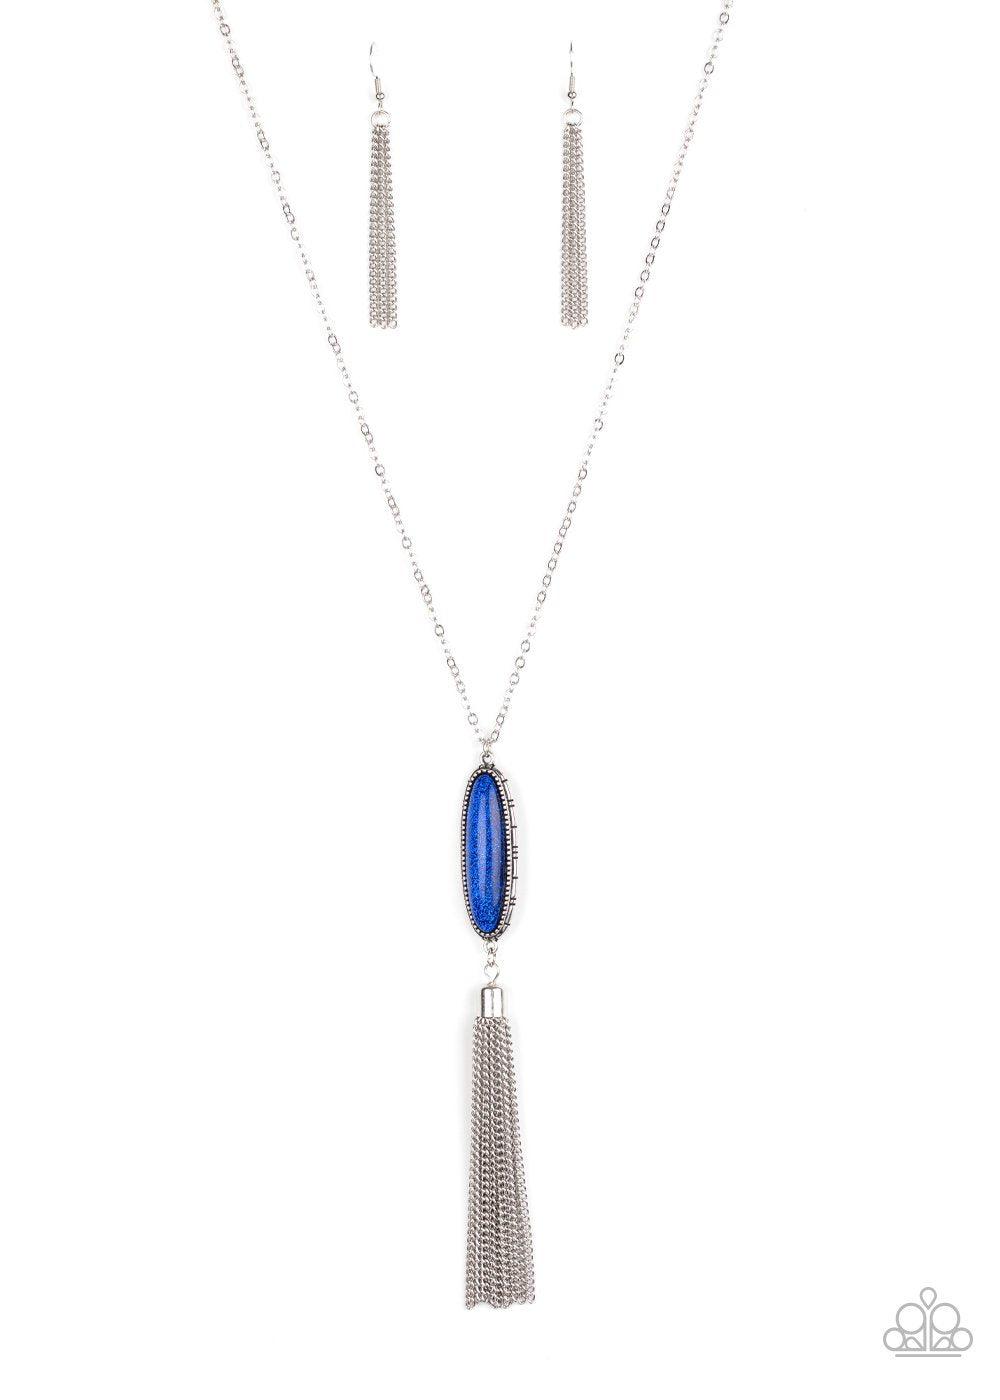 Stay Cool Blue Glittery Bead Tassel Necklace - Paparazzi Accessories-CarasShop.com - $5 Jewelry by Cara Jewels